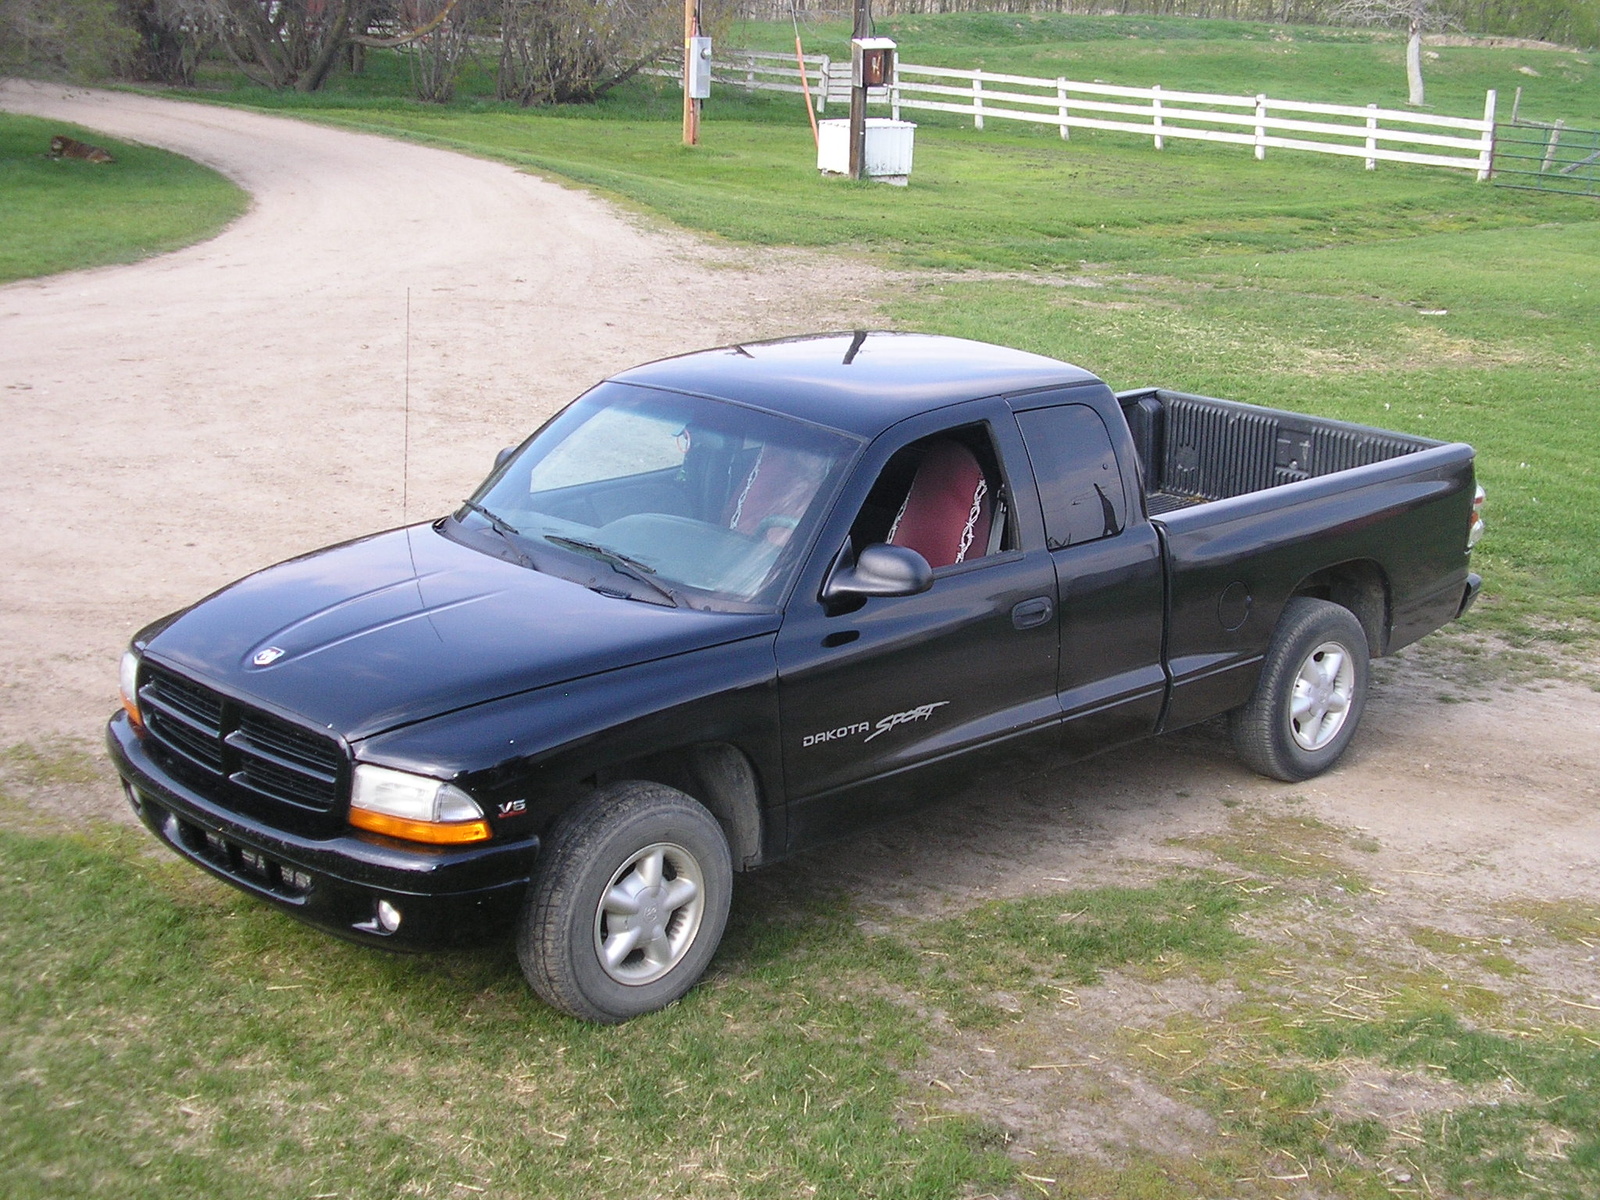 Dodge for sale, i have a 1998 dodge dakota 4x4 lifted it has a rancho lift ...